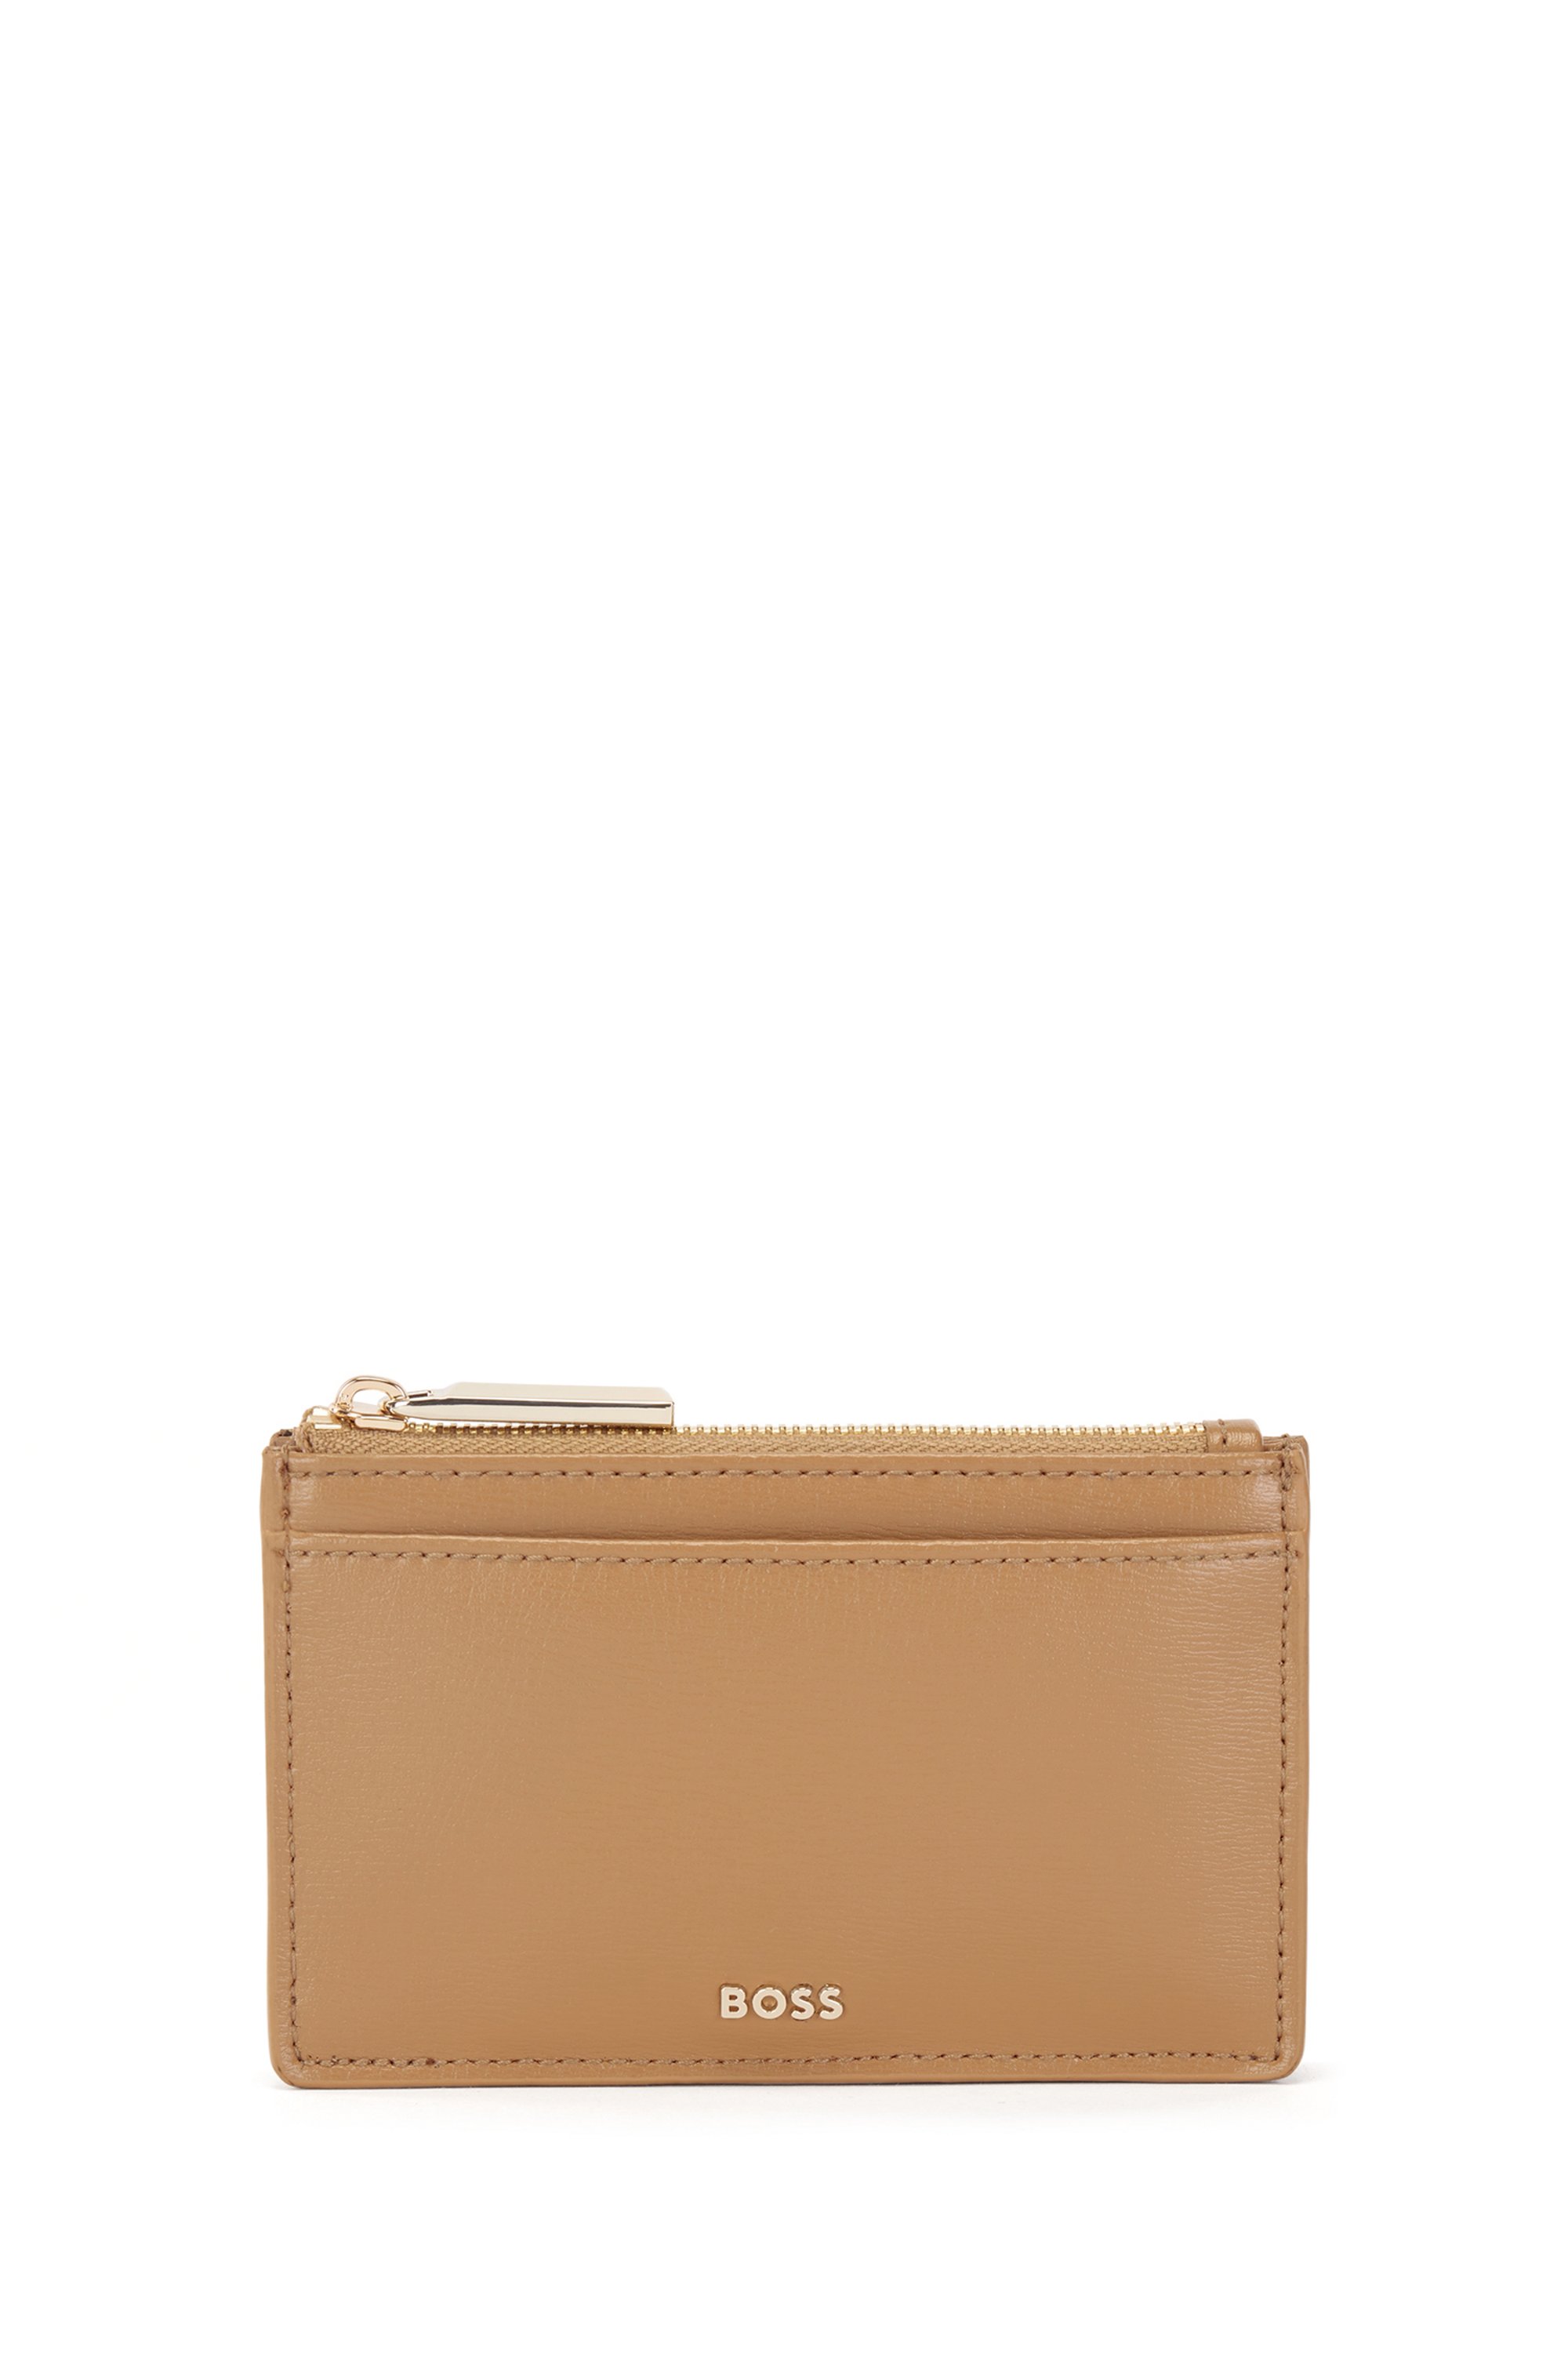 Coated-leather wallet with polished logo and zip top, Beige